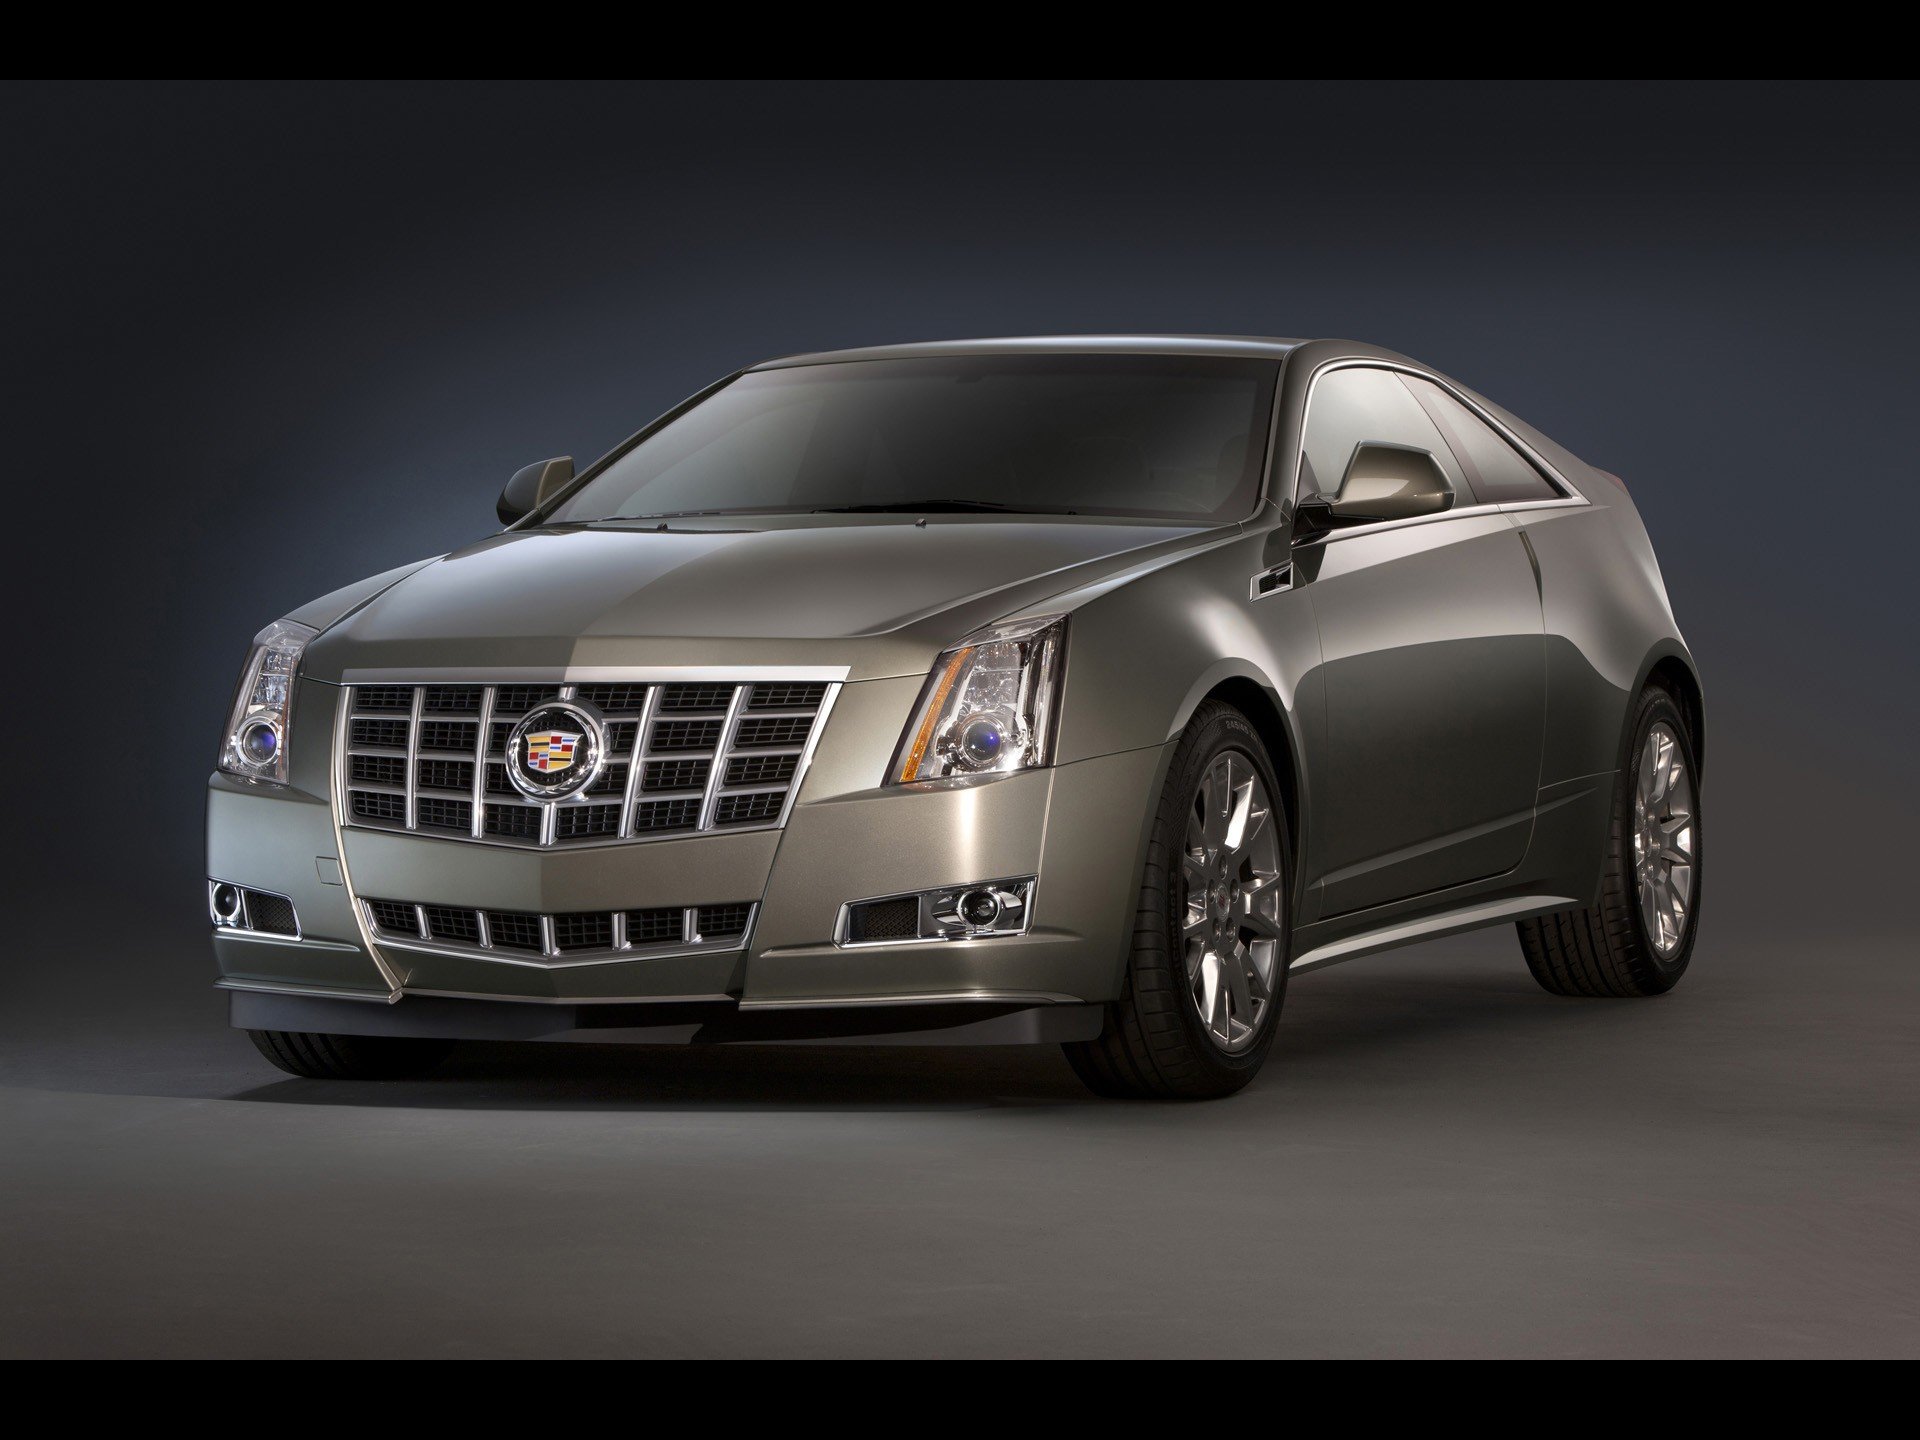 cars, Studio, Vehicles, Coupe, Cadillac, Cts Wallpaper